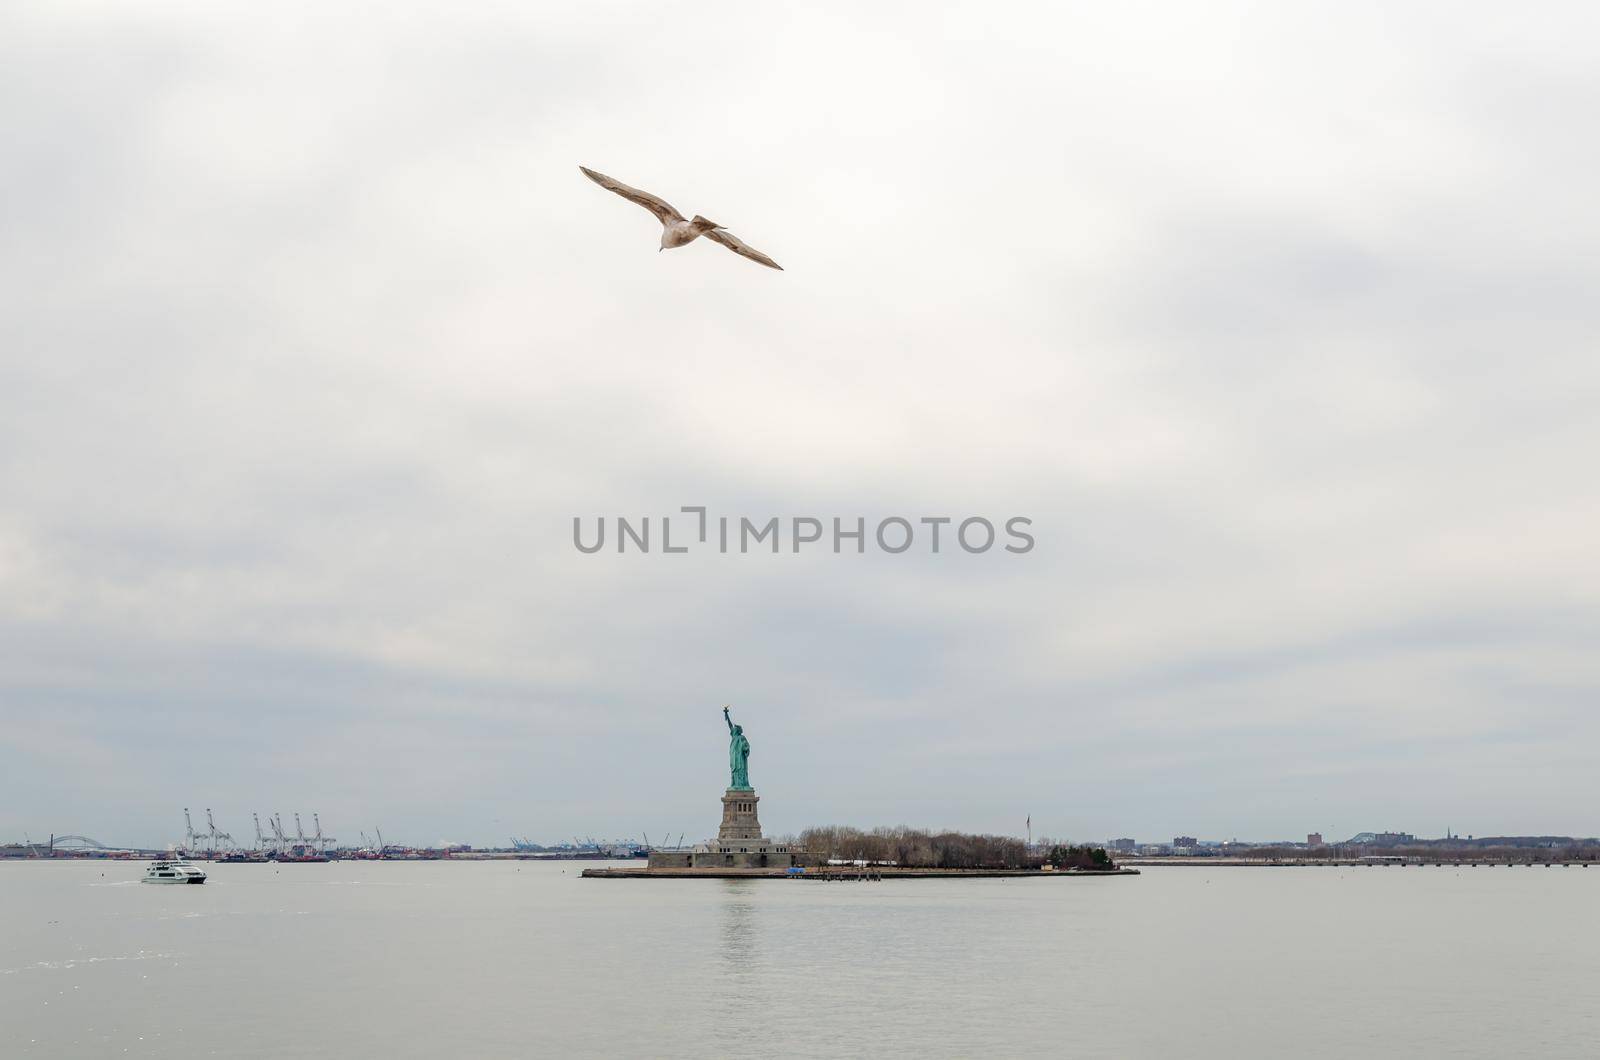 Seagull flying in front of Statue of Liberty, New York City by bildgigant